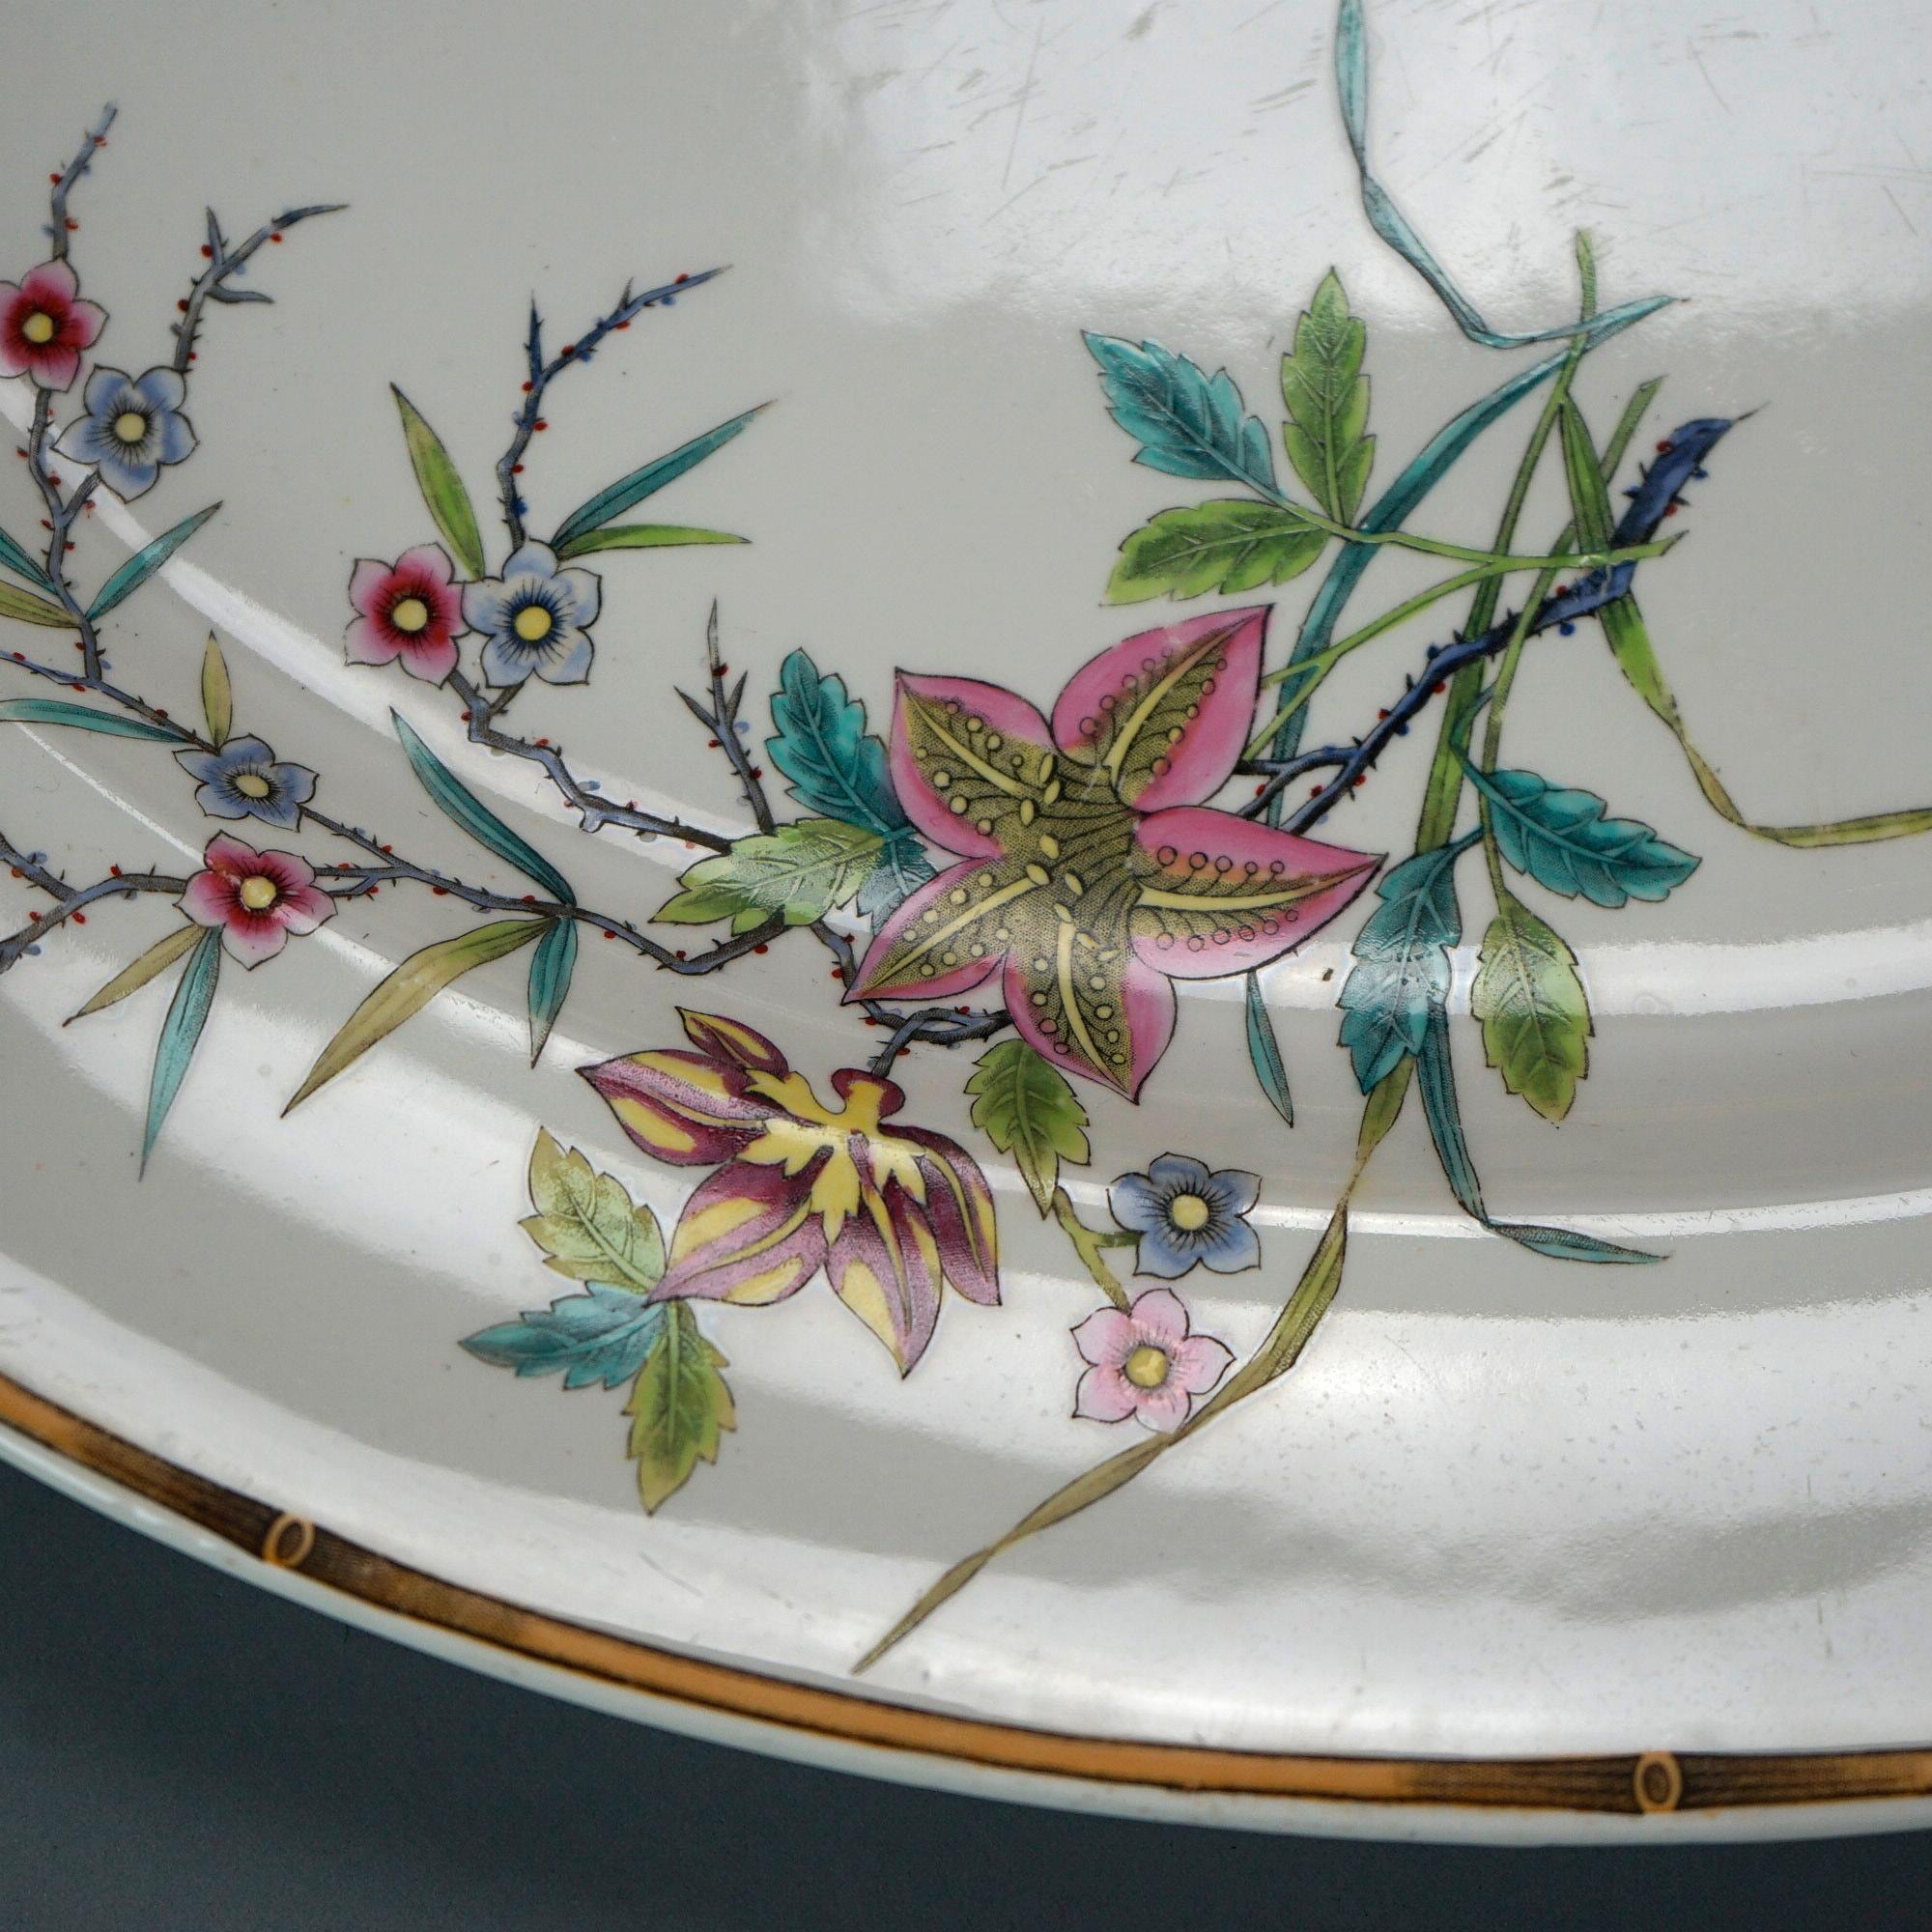 Antique Aesthetic Movement Porcelain Platter, Bird & Garden Elements, 19th C In Good Condition For Sale In Big Flats, NY